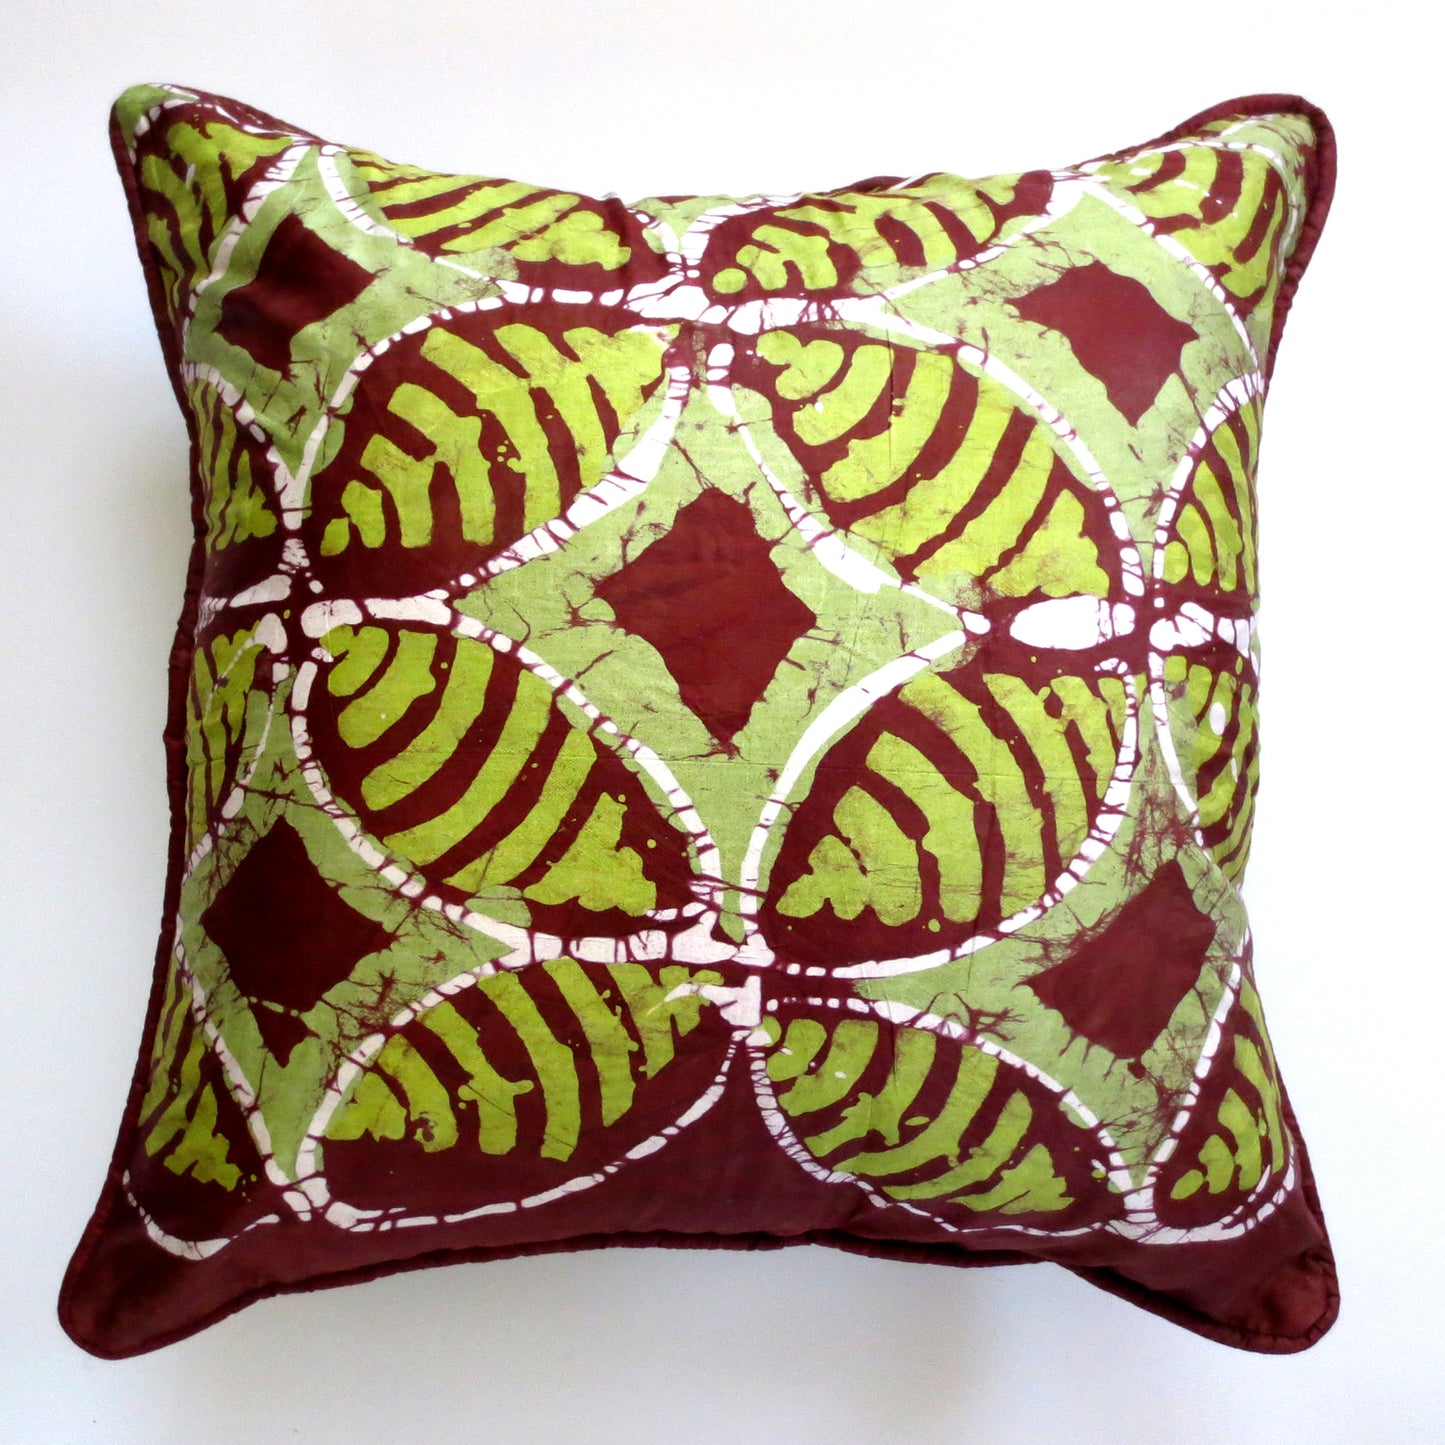 20"x20" pillow cover. Chartreuse, white and copper motif. noraokafor